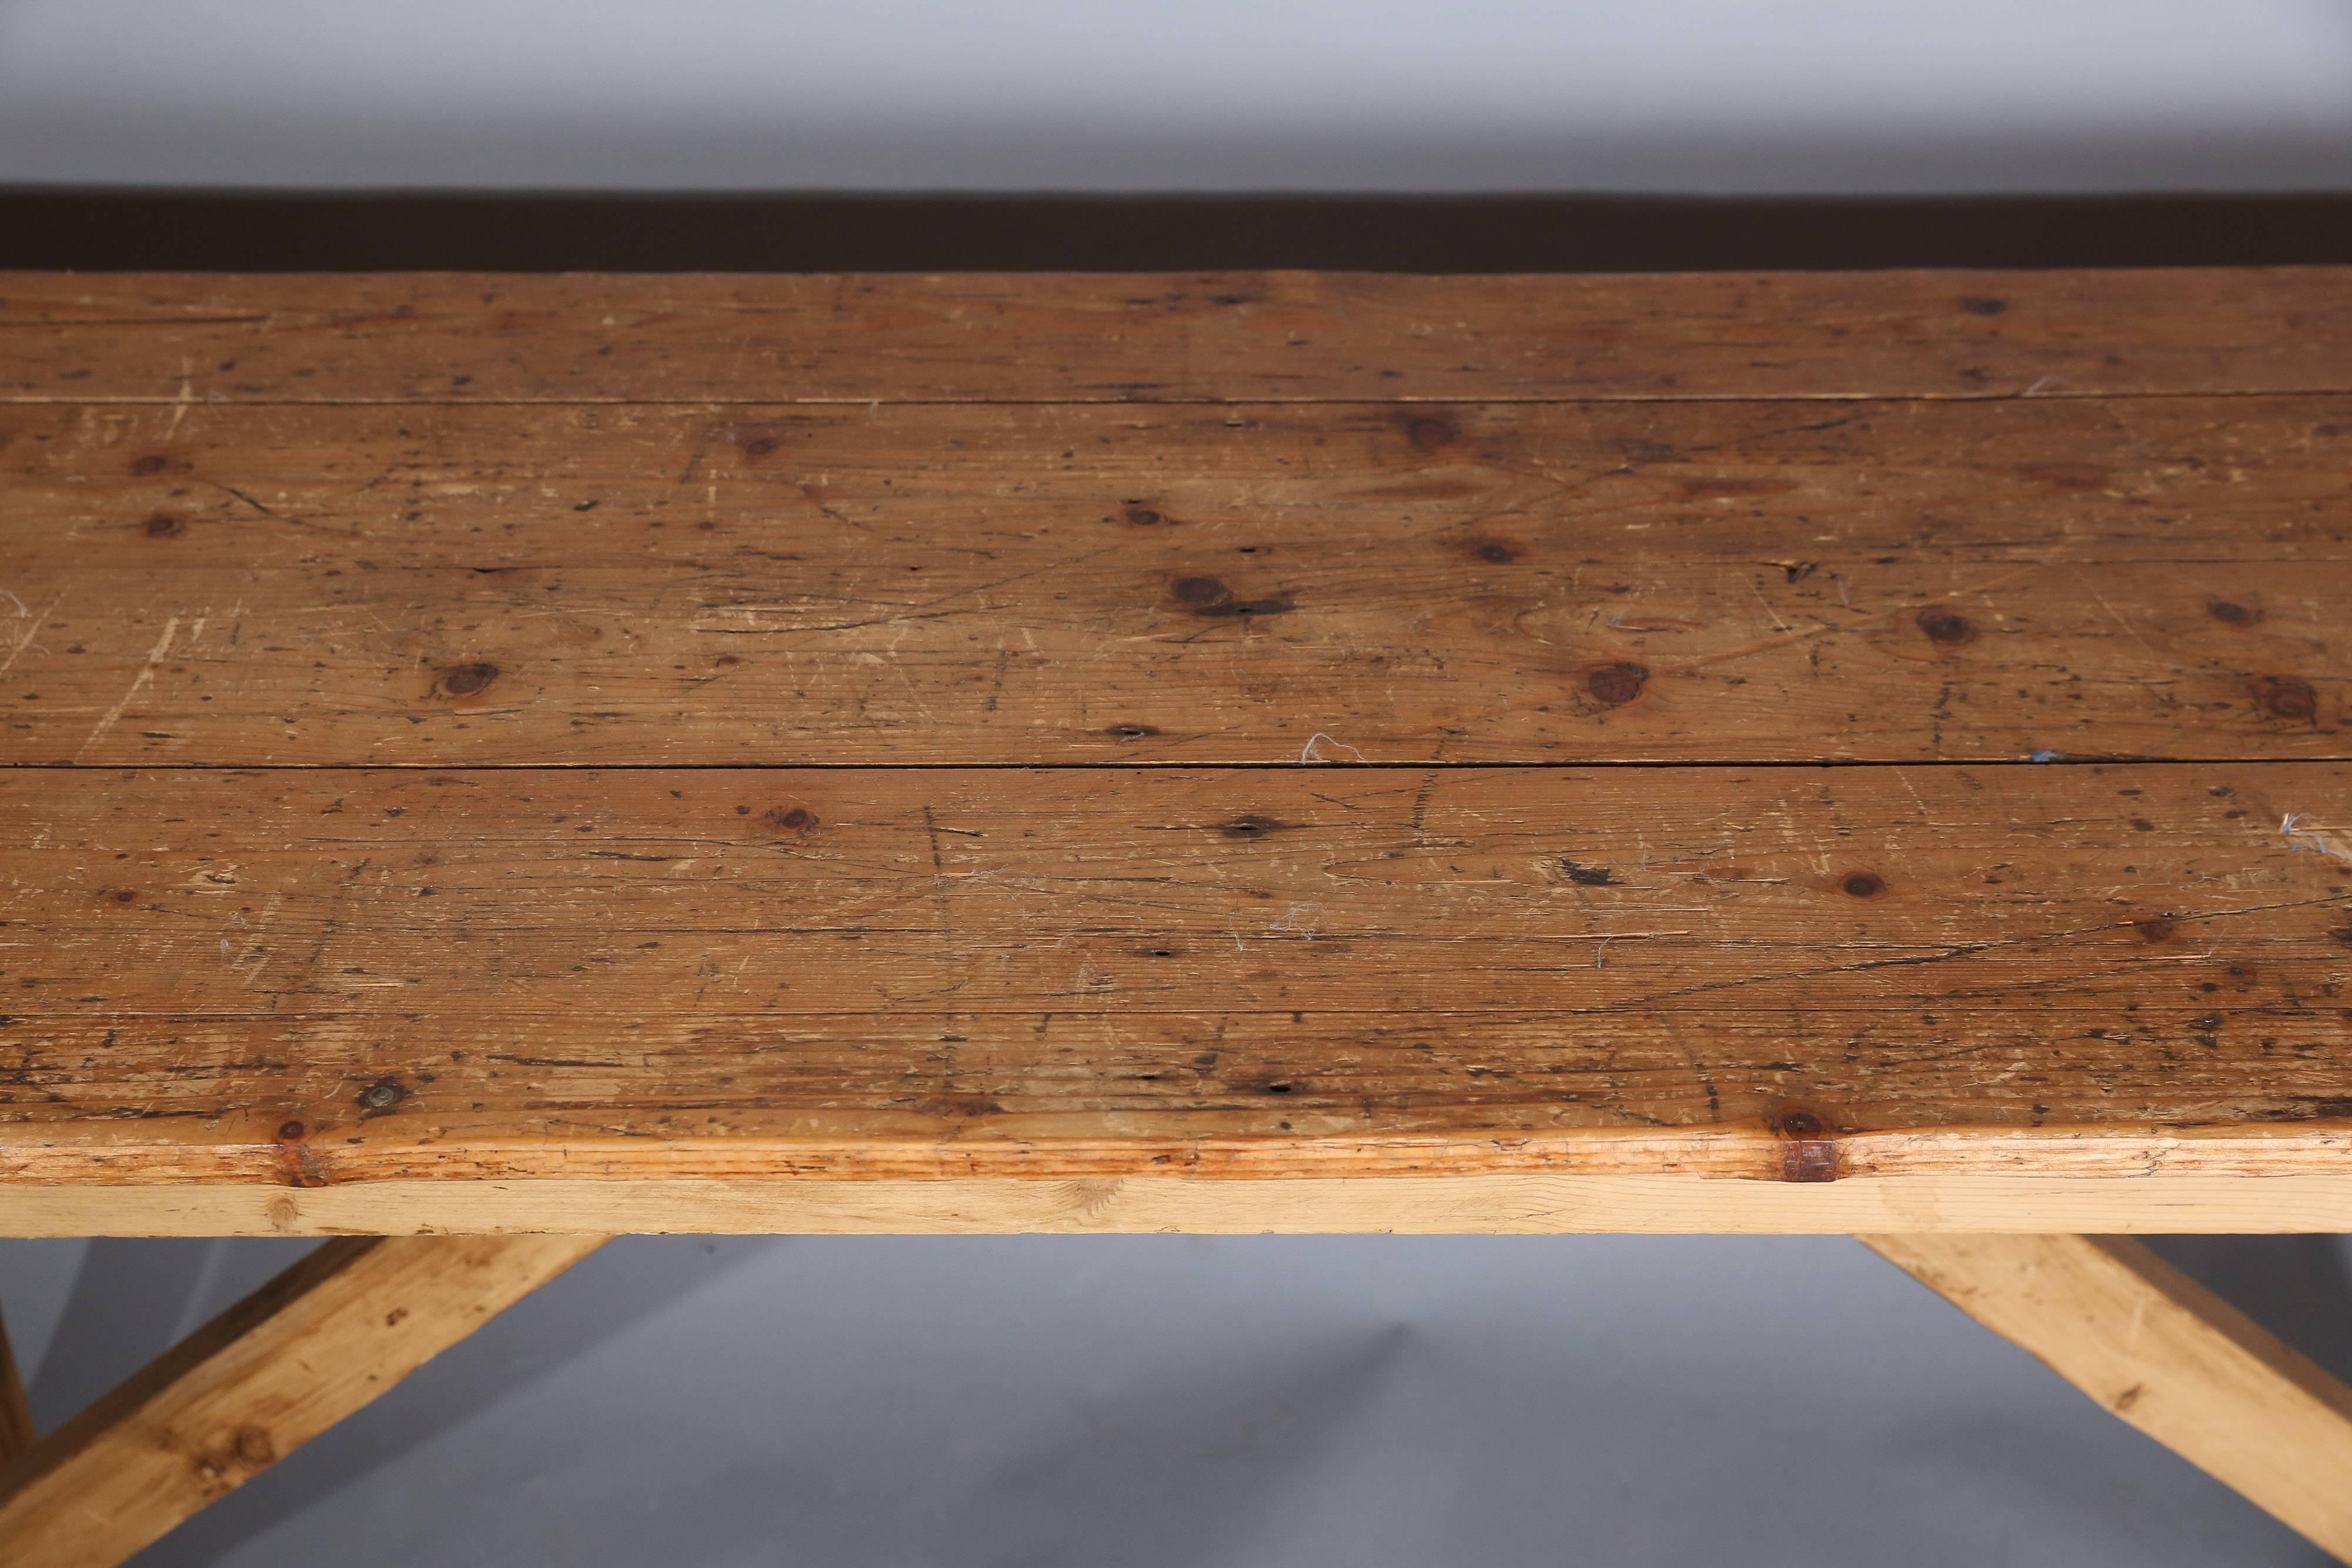 Very simple console or worktable has plank top, straight legs, simple apron and trestle stretchers.

Very rustic.

